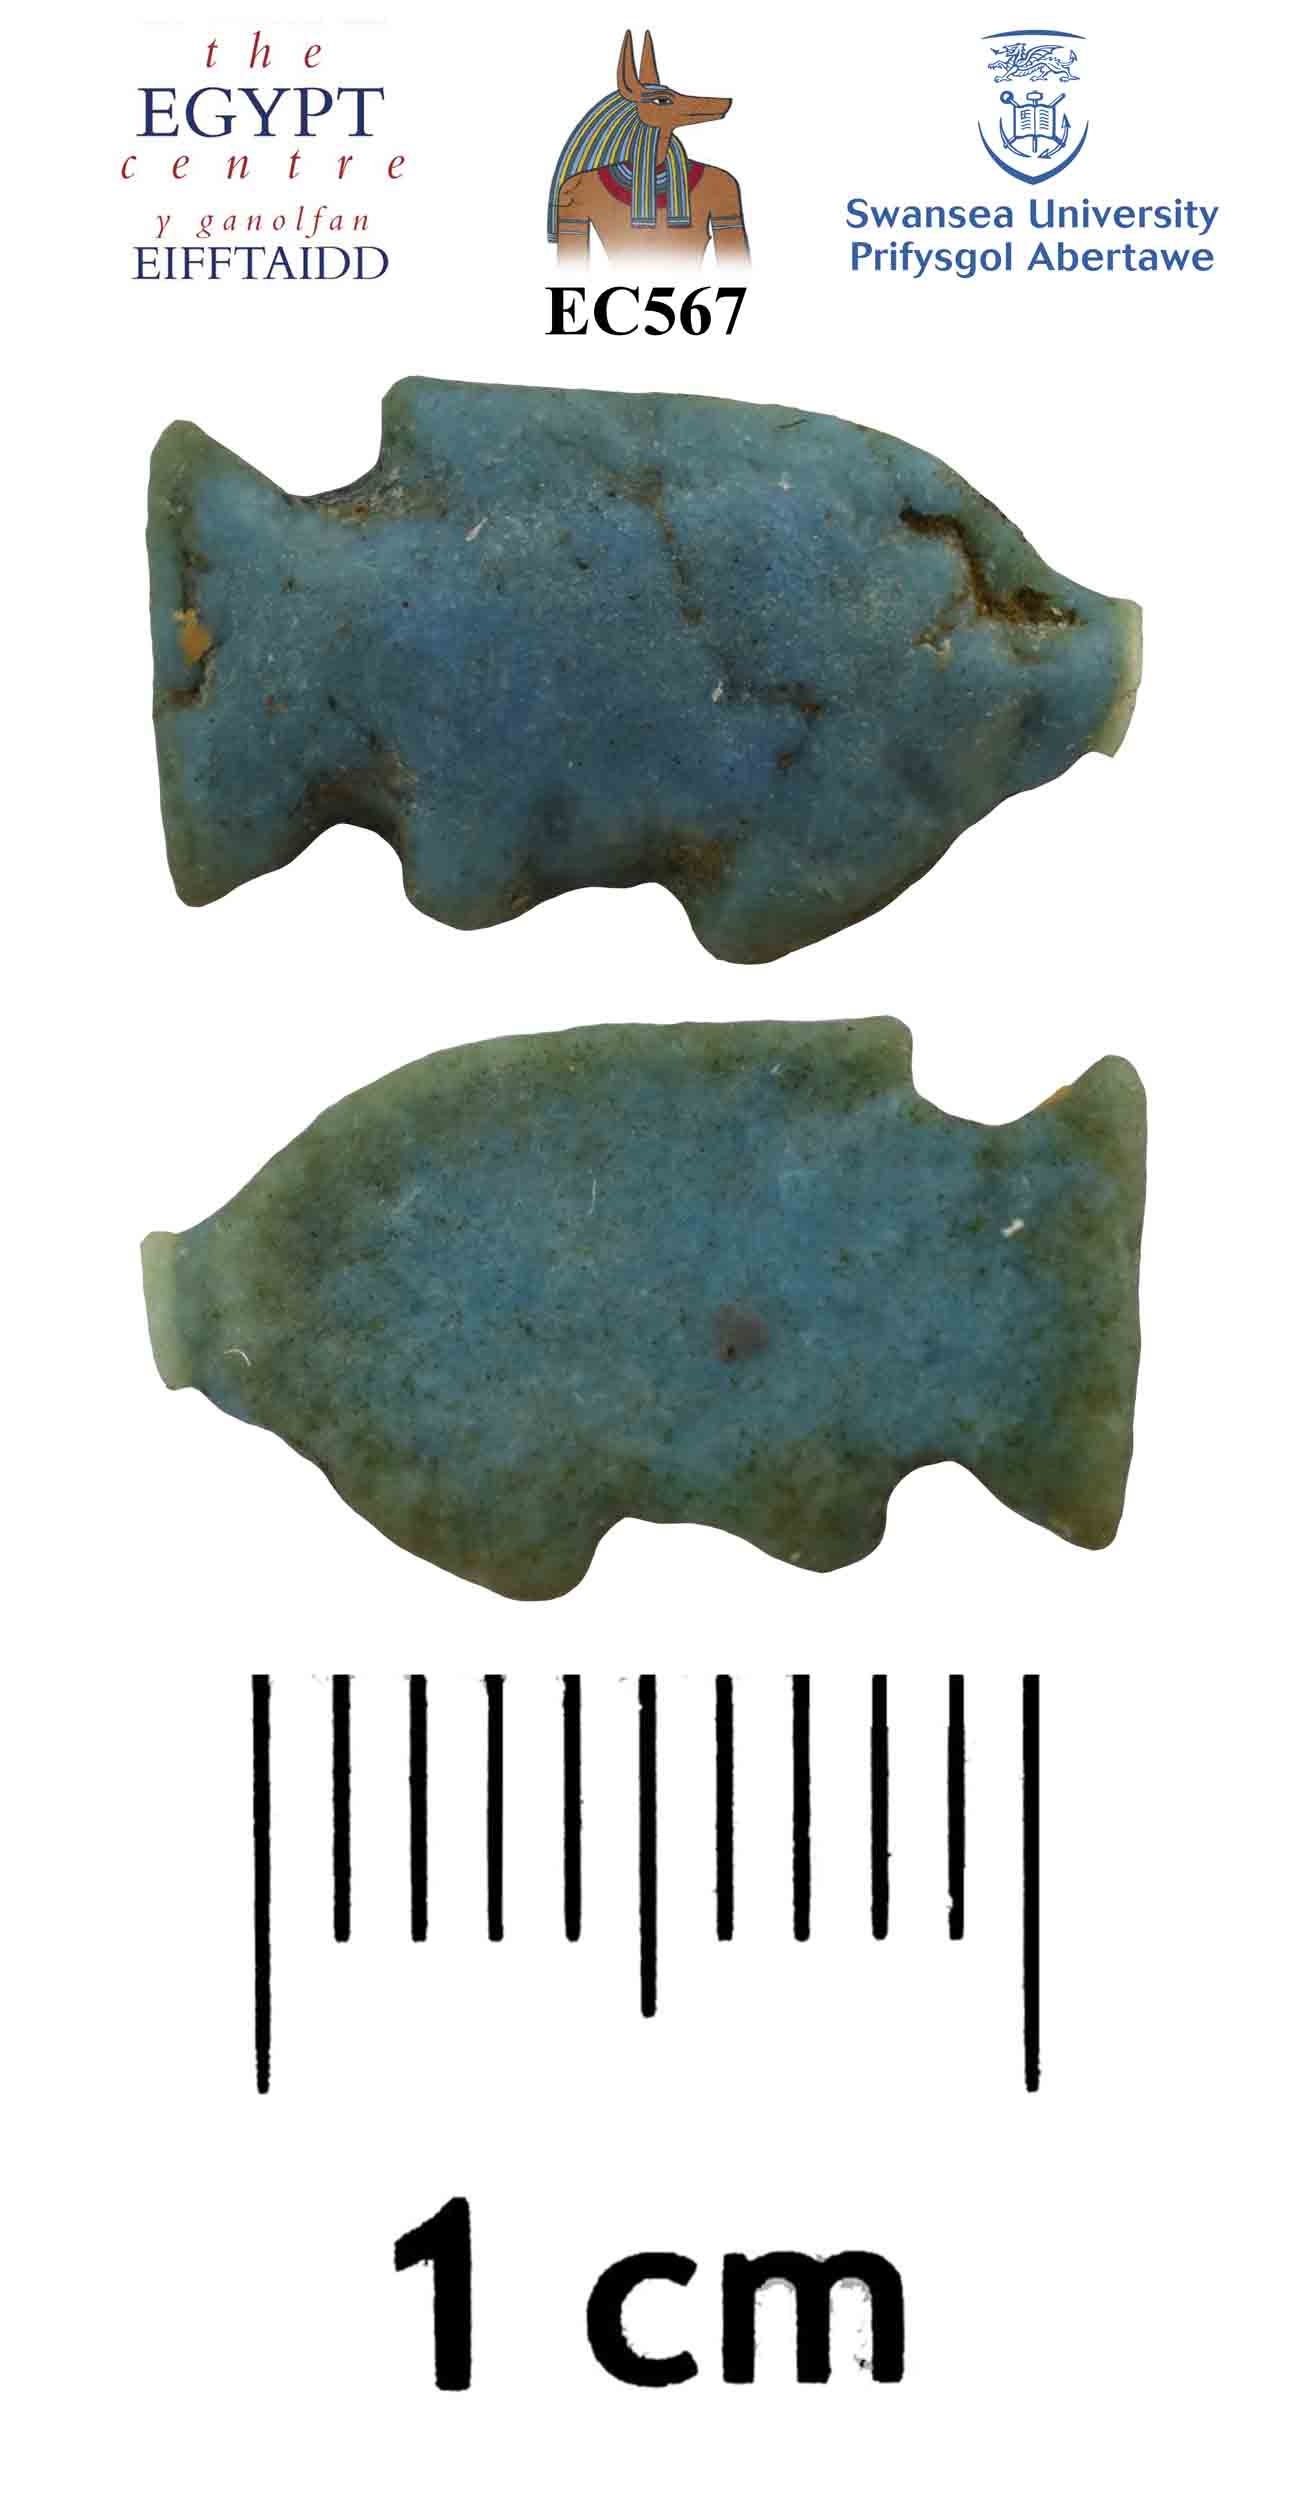 Image for: Amulet of a fish